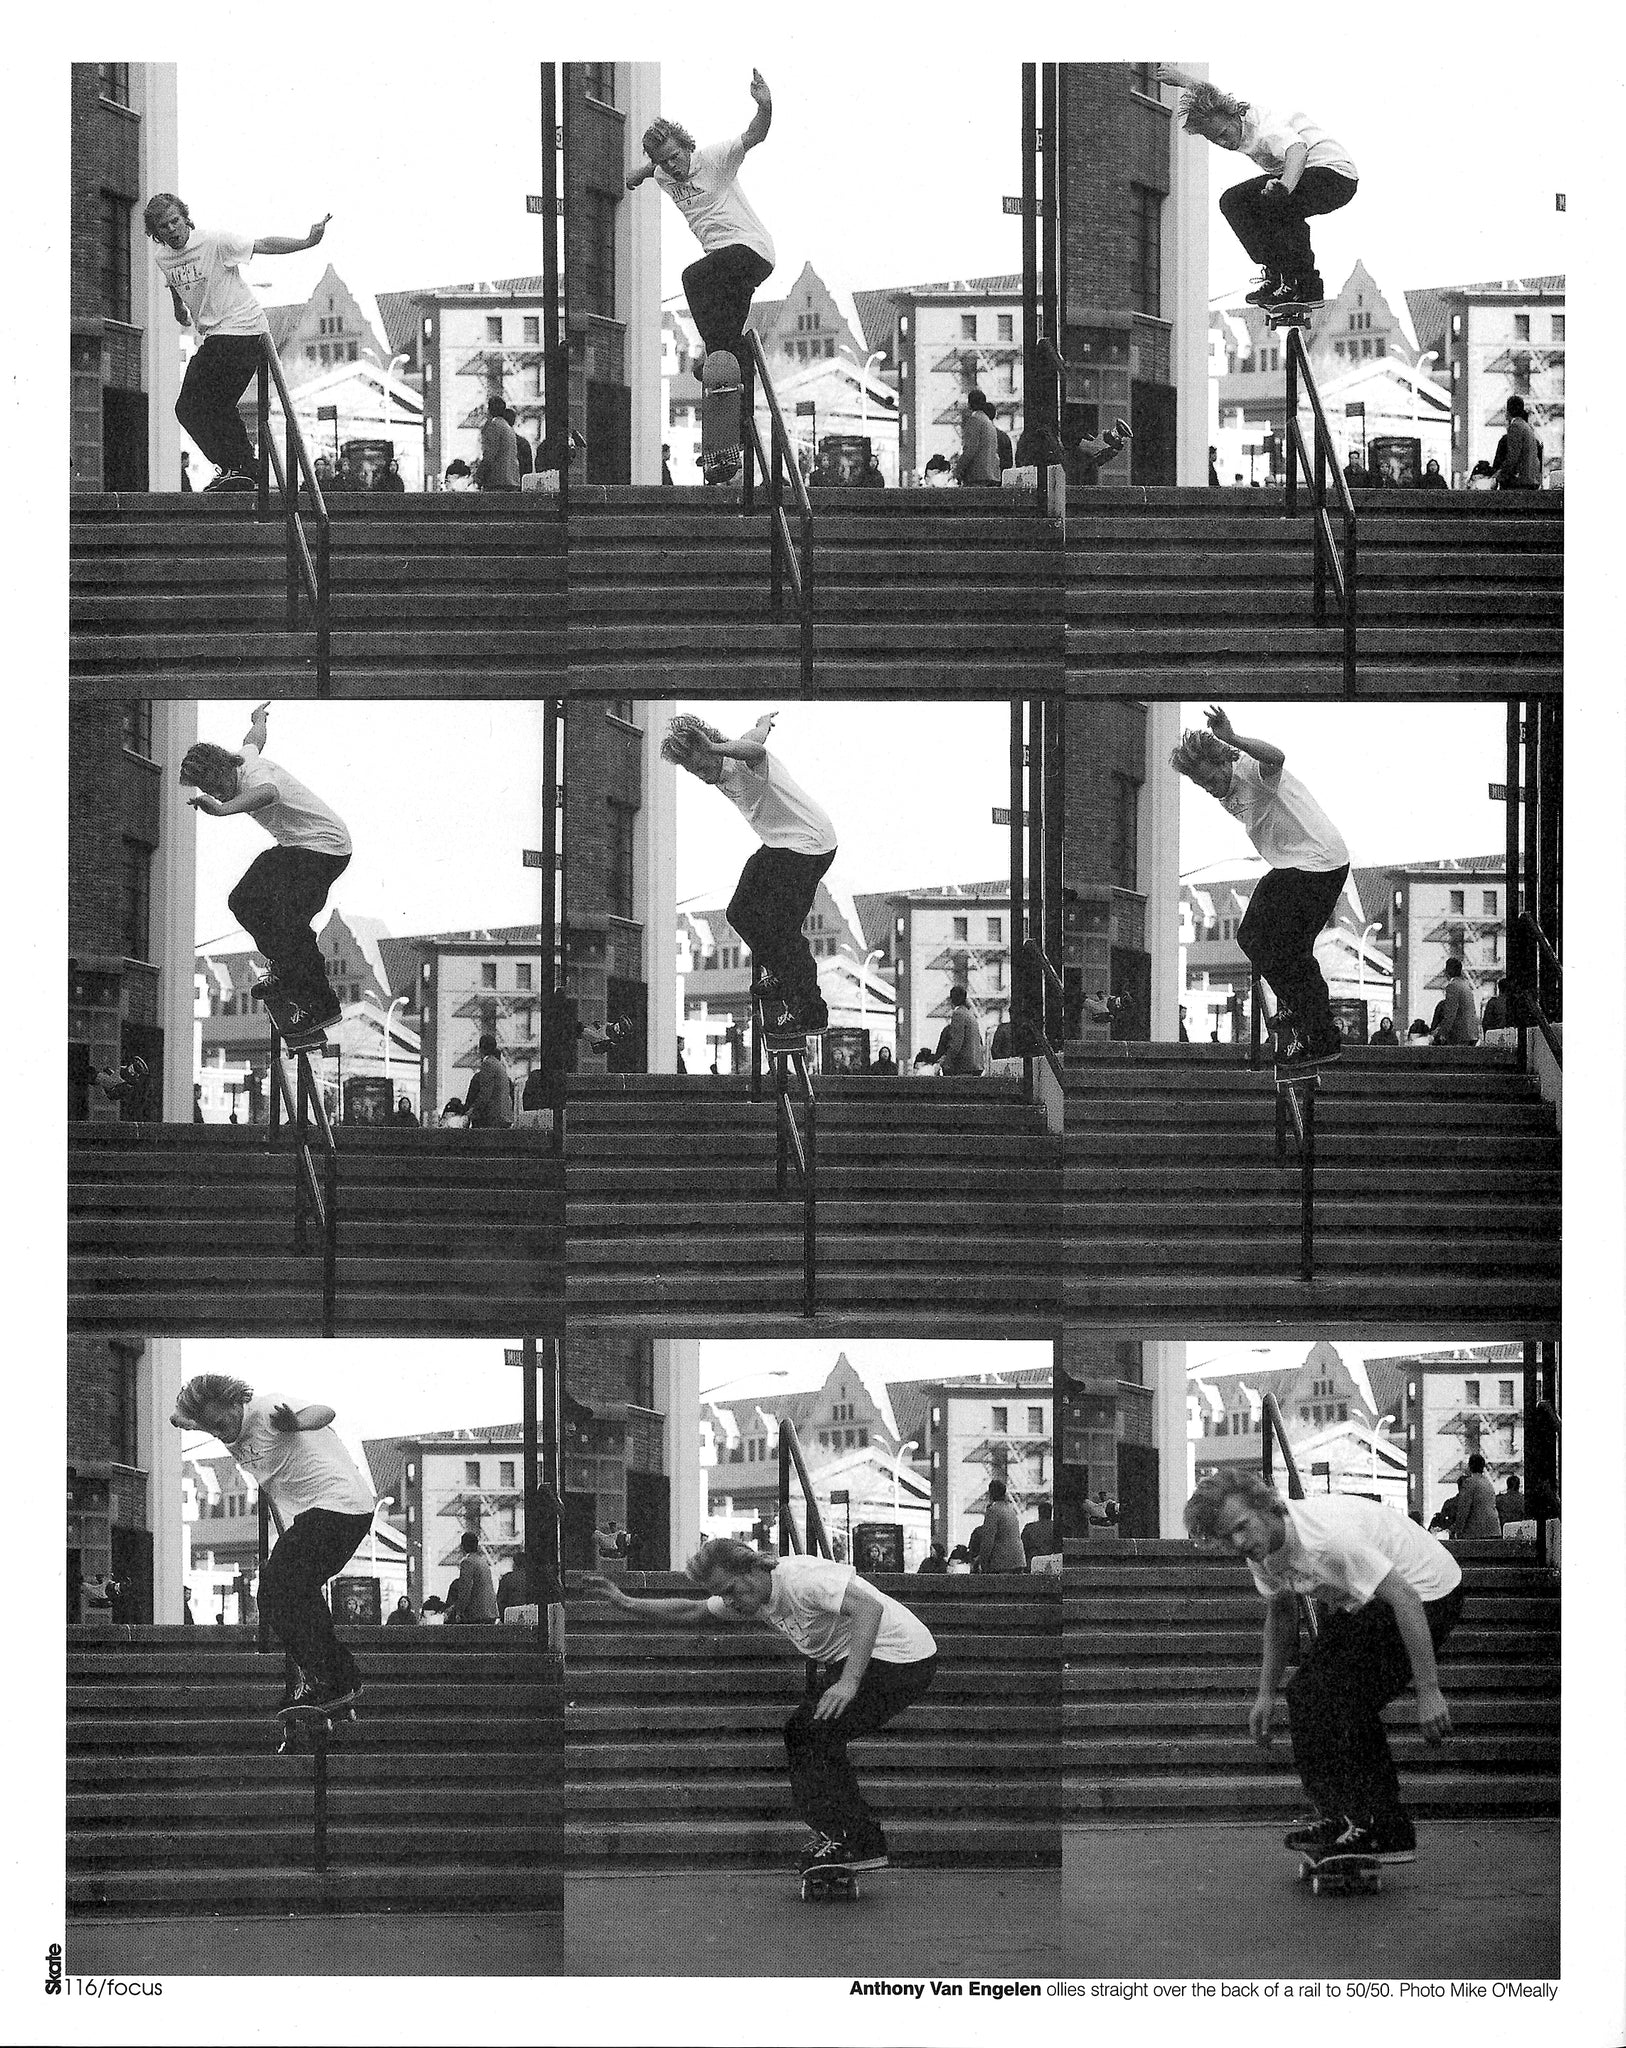 Anthony Van Engelen, over-the-back 5050, New York, 2000. photo: Mike O'Meally